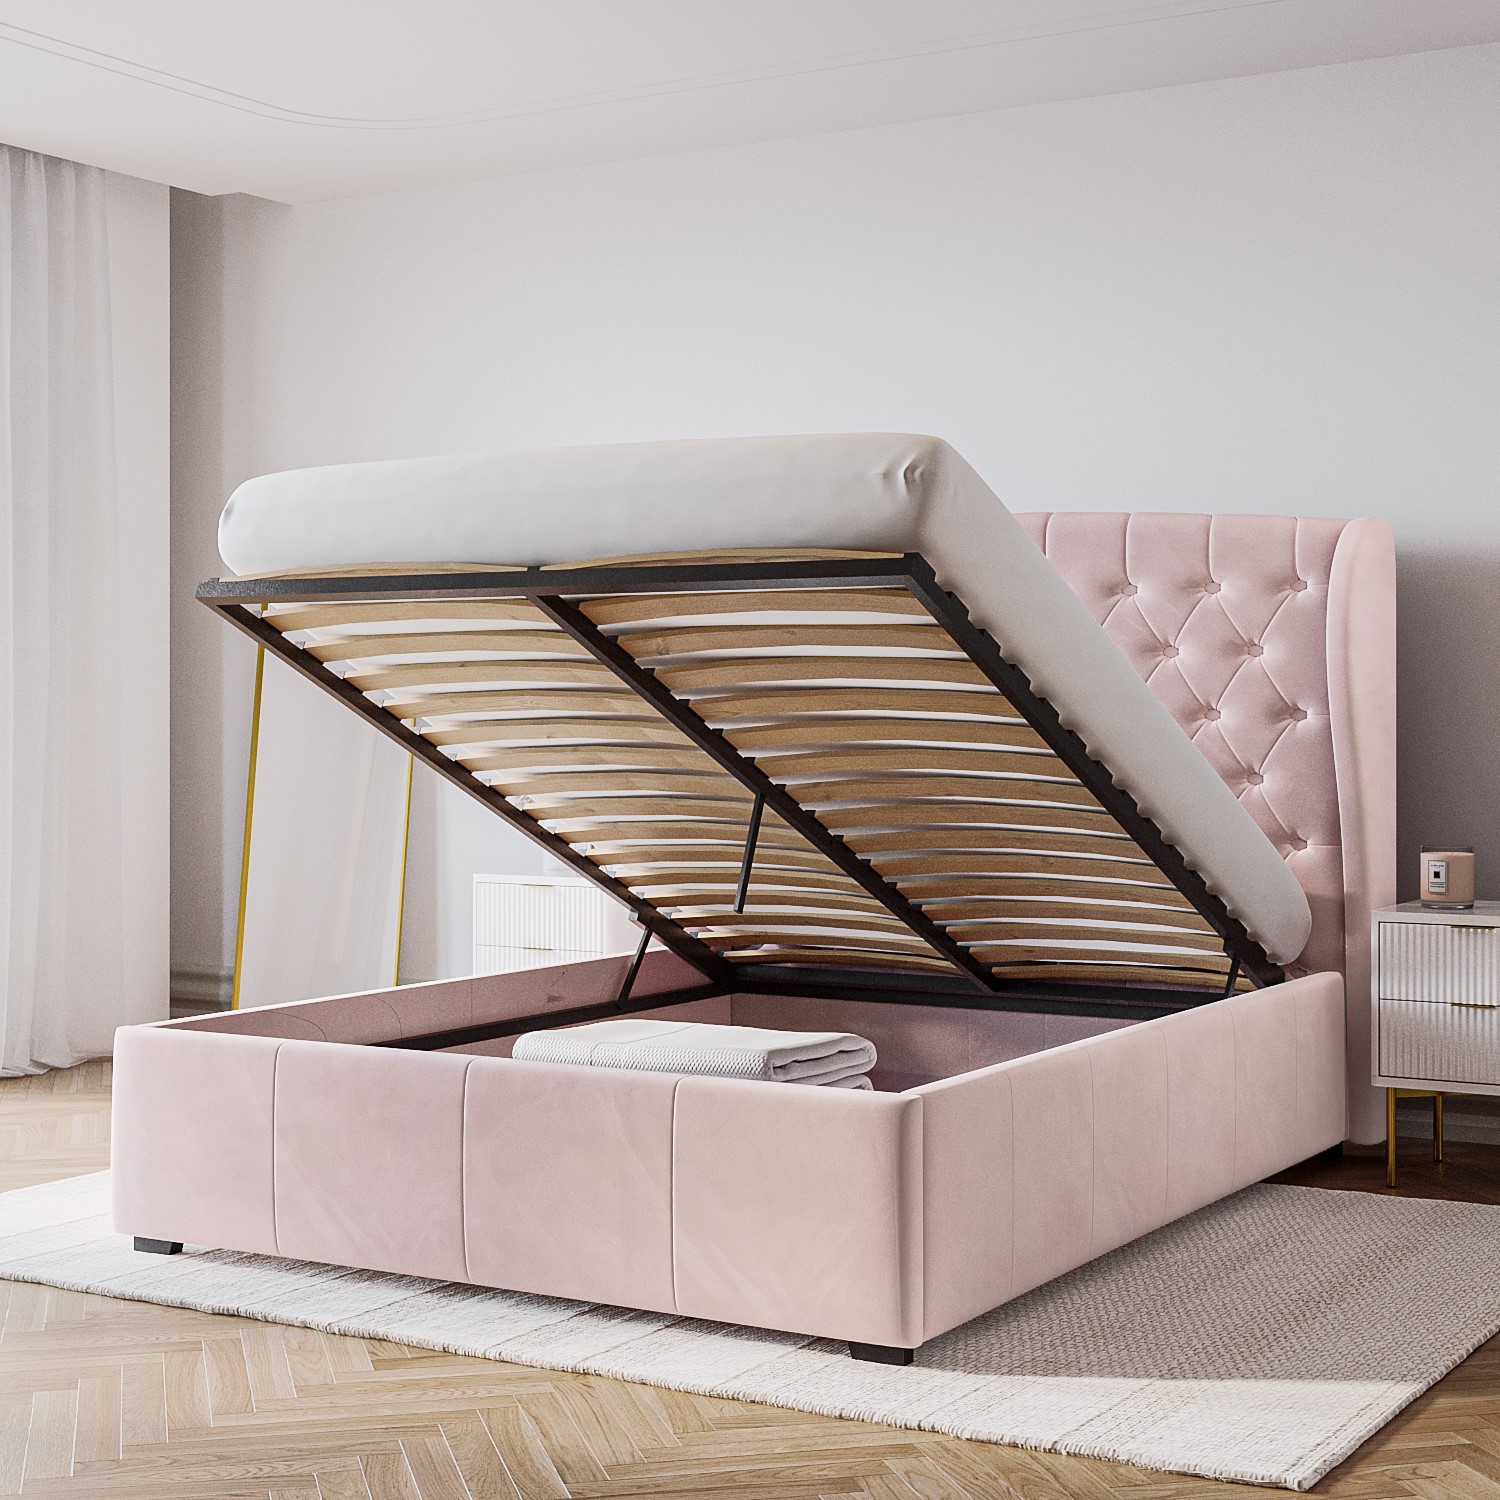 Read more about Pink velvet small double ottoman bed with winged headboard safina